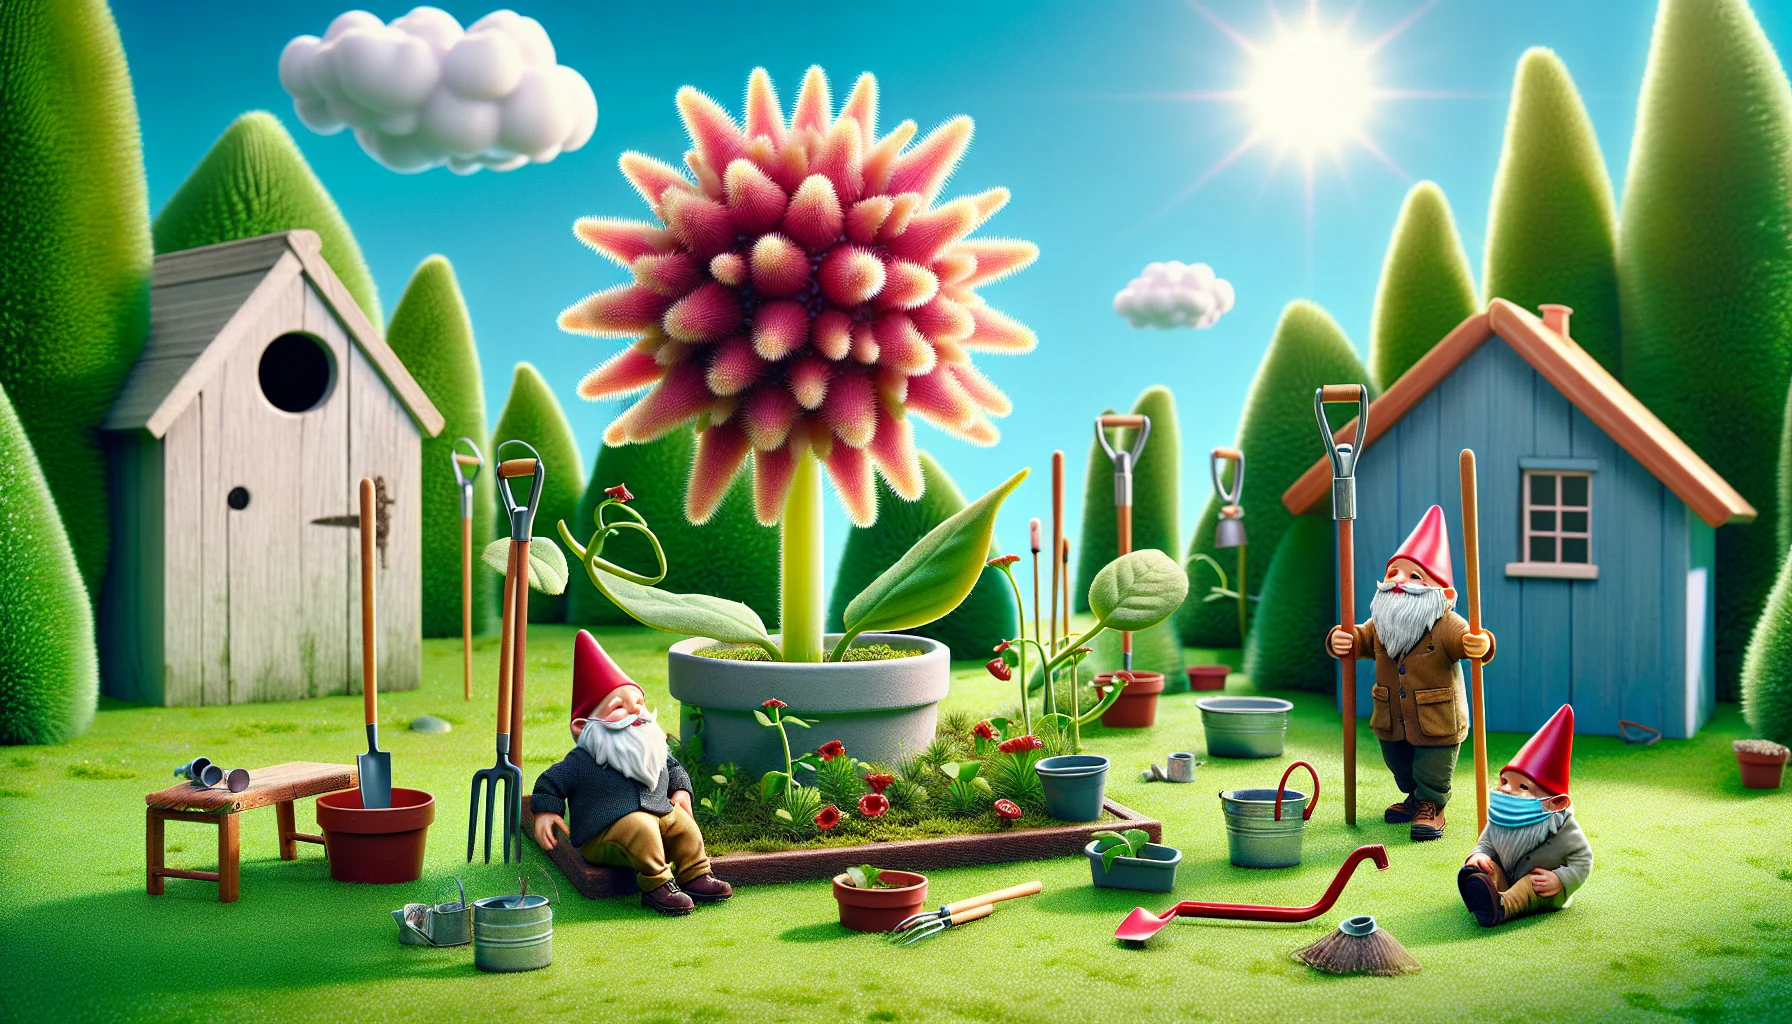 Generate a highly realistic image showcasing a chlamydia flower in an amusing scenario. The flower is placed in a quirky, miniature set that resembles a full-scale garden, complete with tiny garden tools, plant pots, and a birdhouse. The backdrop is bright and sunny, perhaps with a few fluffy white clouds to set a charming atmosphere. A couple of garden gnomes, one male, one female, are also in the scene. The male gnome is Hispanic and the female gnome is Middle Eastern. They are both laughing and appear to be enjoying their gardening tasks, inviting people to bask in the joy of gardening.